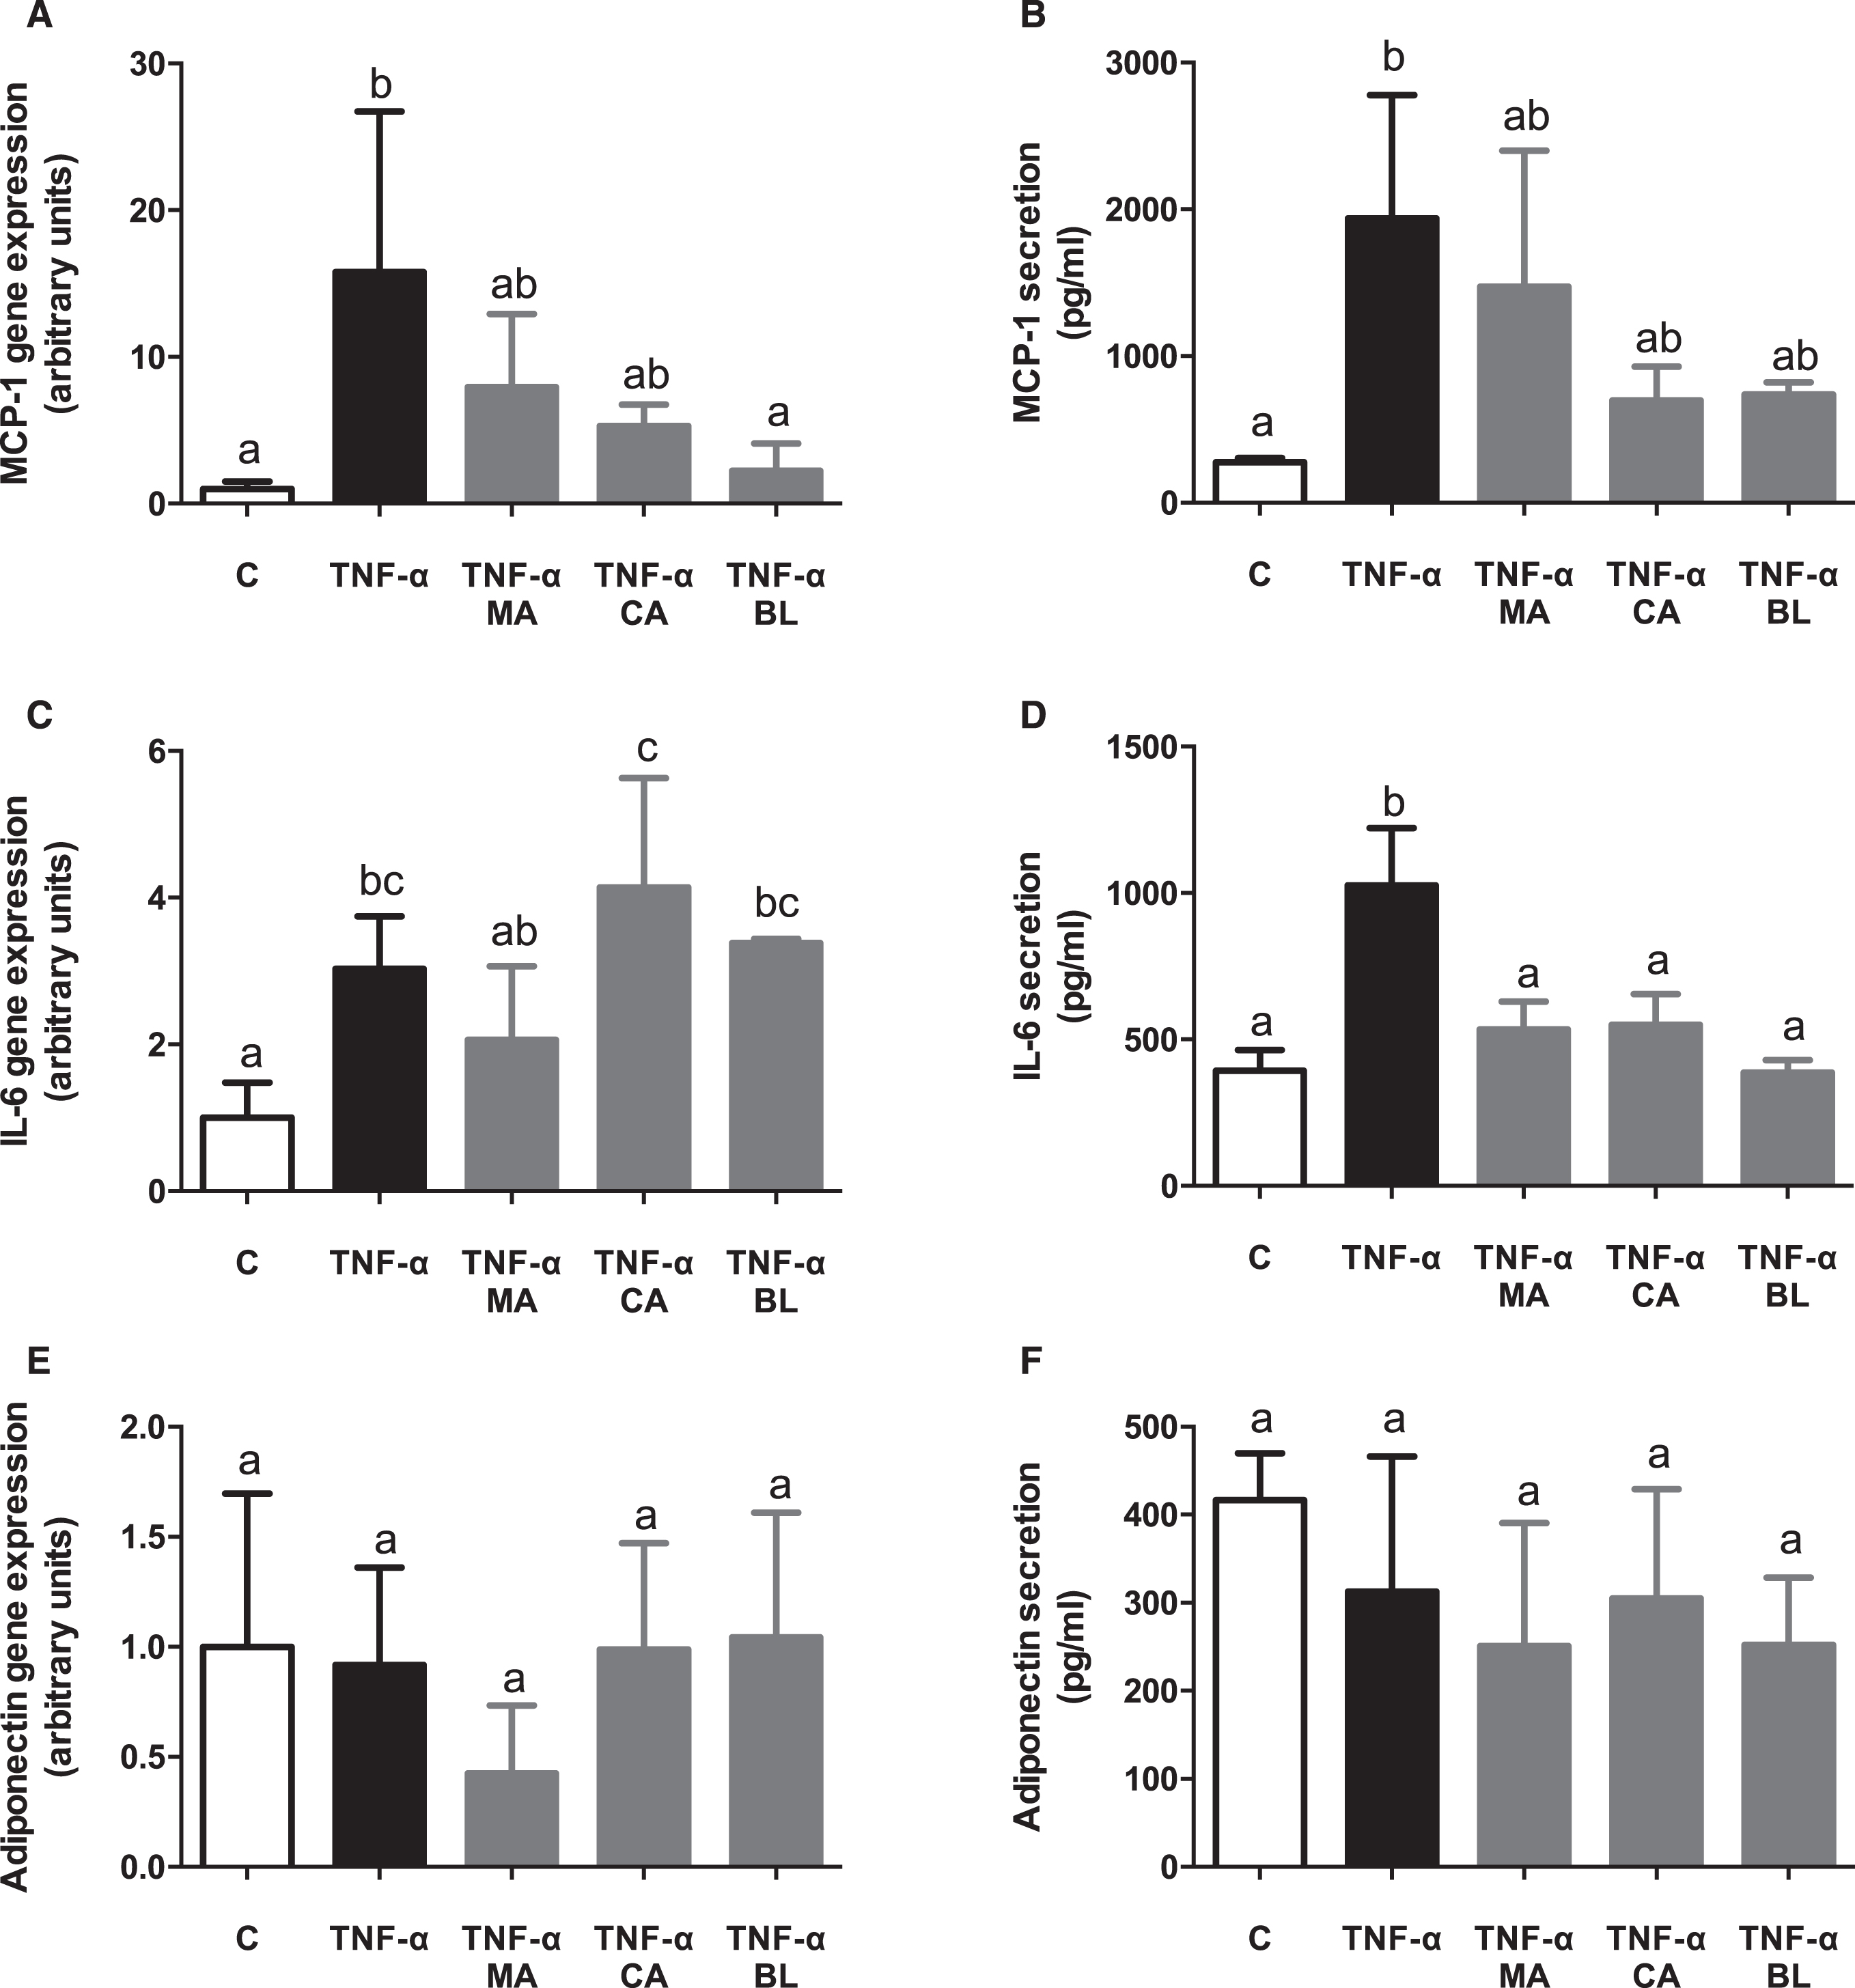 In vitro anti-inflammatory effects of berries extracts in TNF-α activated human adipocytes. Human visceral preadipocytes were differentiated, pre-treated with 100 μM total polyphenols from each extract for 1 hour, then primed 24 hours with 4 ng/mL of TNF-α. Cells and culture media were saved for further determinations. (A) MCP-1 gene expression, (B) and release, (C) IL-6 gene expression, (D) and release, (E) Adiponectin gene expression, (F) and release, were assayed. Data (n = 4) were expressed as mean±SD and analyzed with one-way ANOVA followed by Tukey posthoc tests. C, control; MA, Maqui; CA, Calafate; BL, Blueberry. Different letters showed a statistical significance of at least p < 0.05.